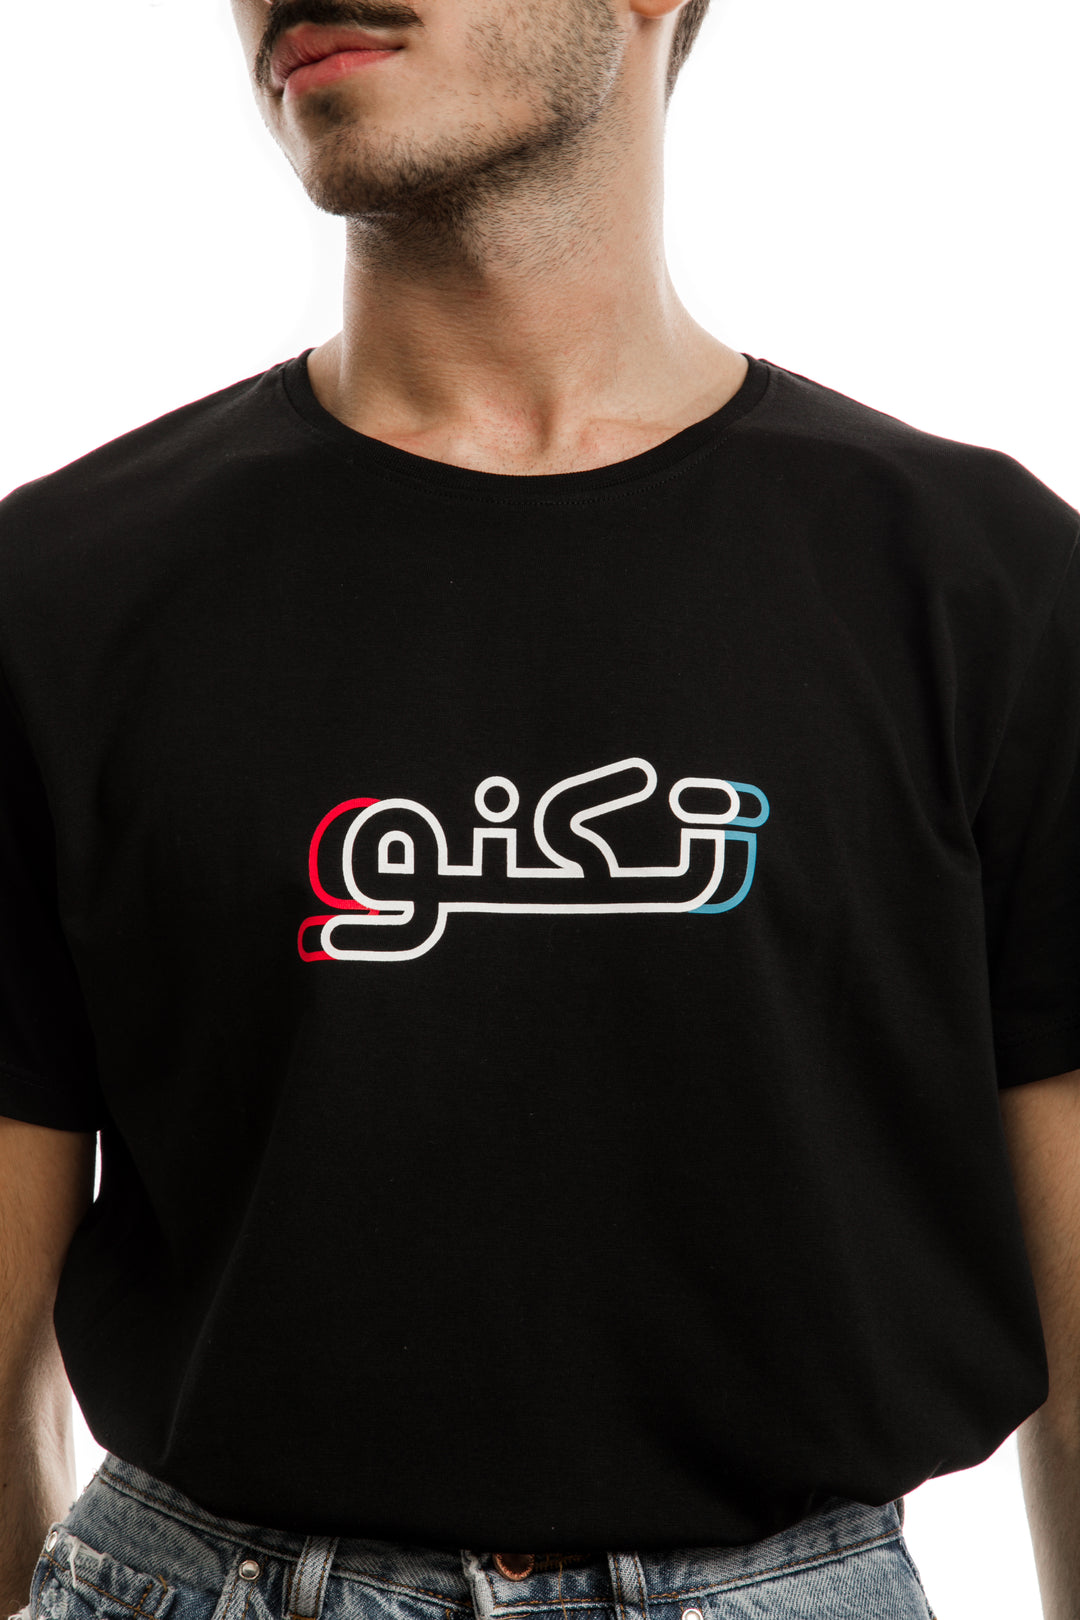 Young adult male wearing black T-shirt with Techno written in Arabic تكنو and printed in blue, red and white silkscreen in the center of the t-shirt.